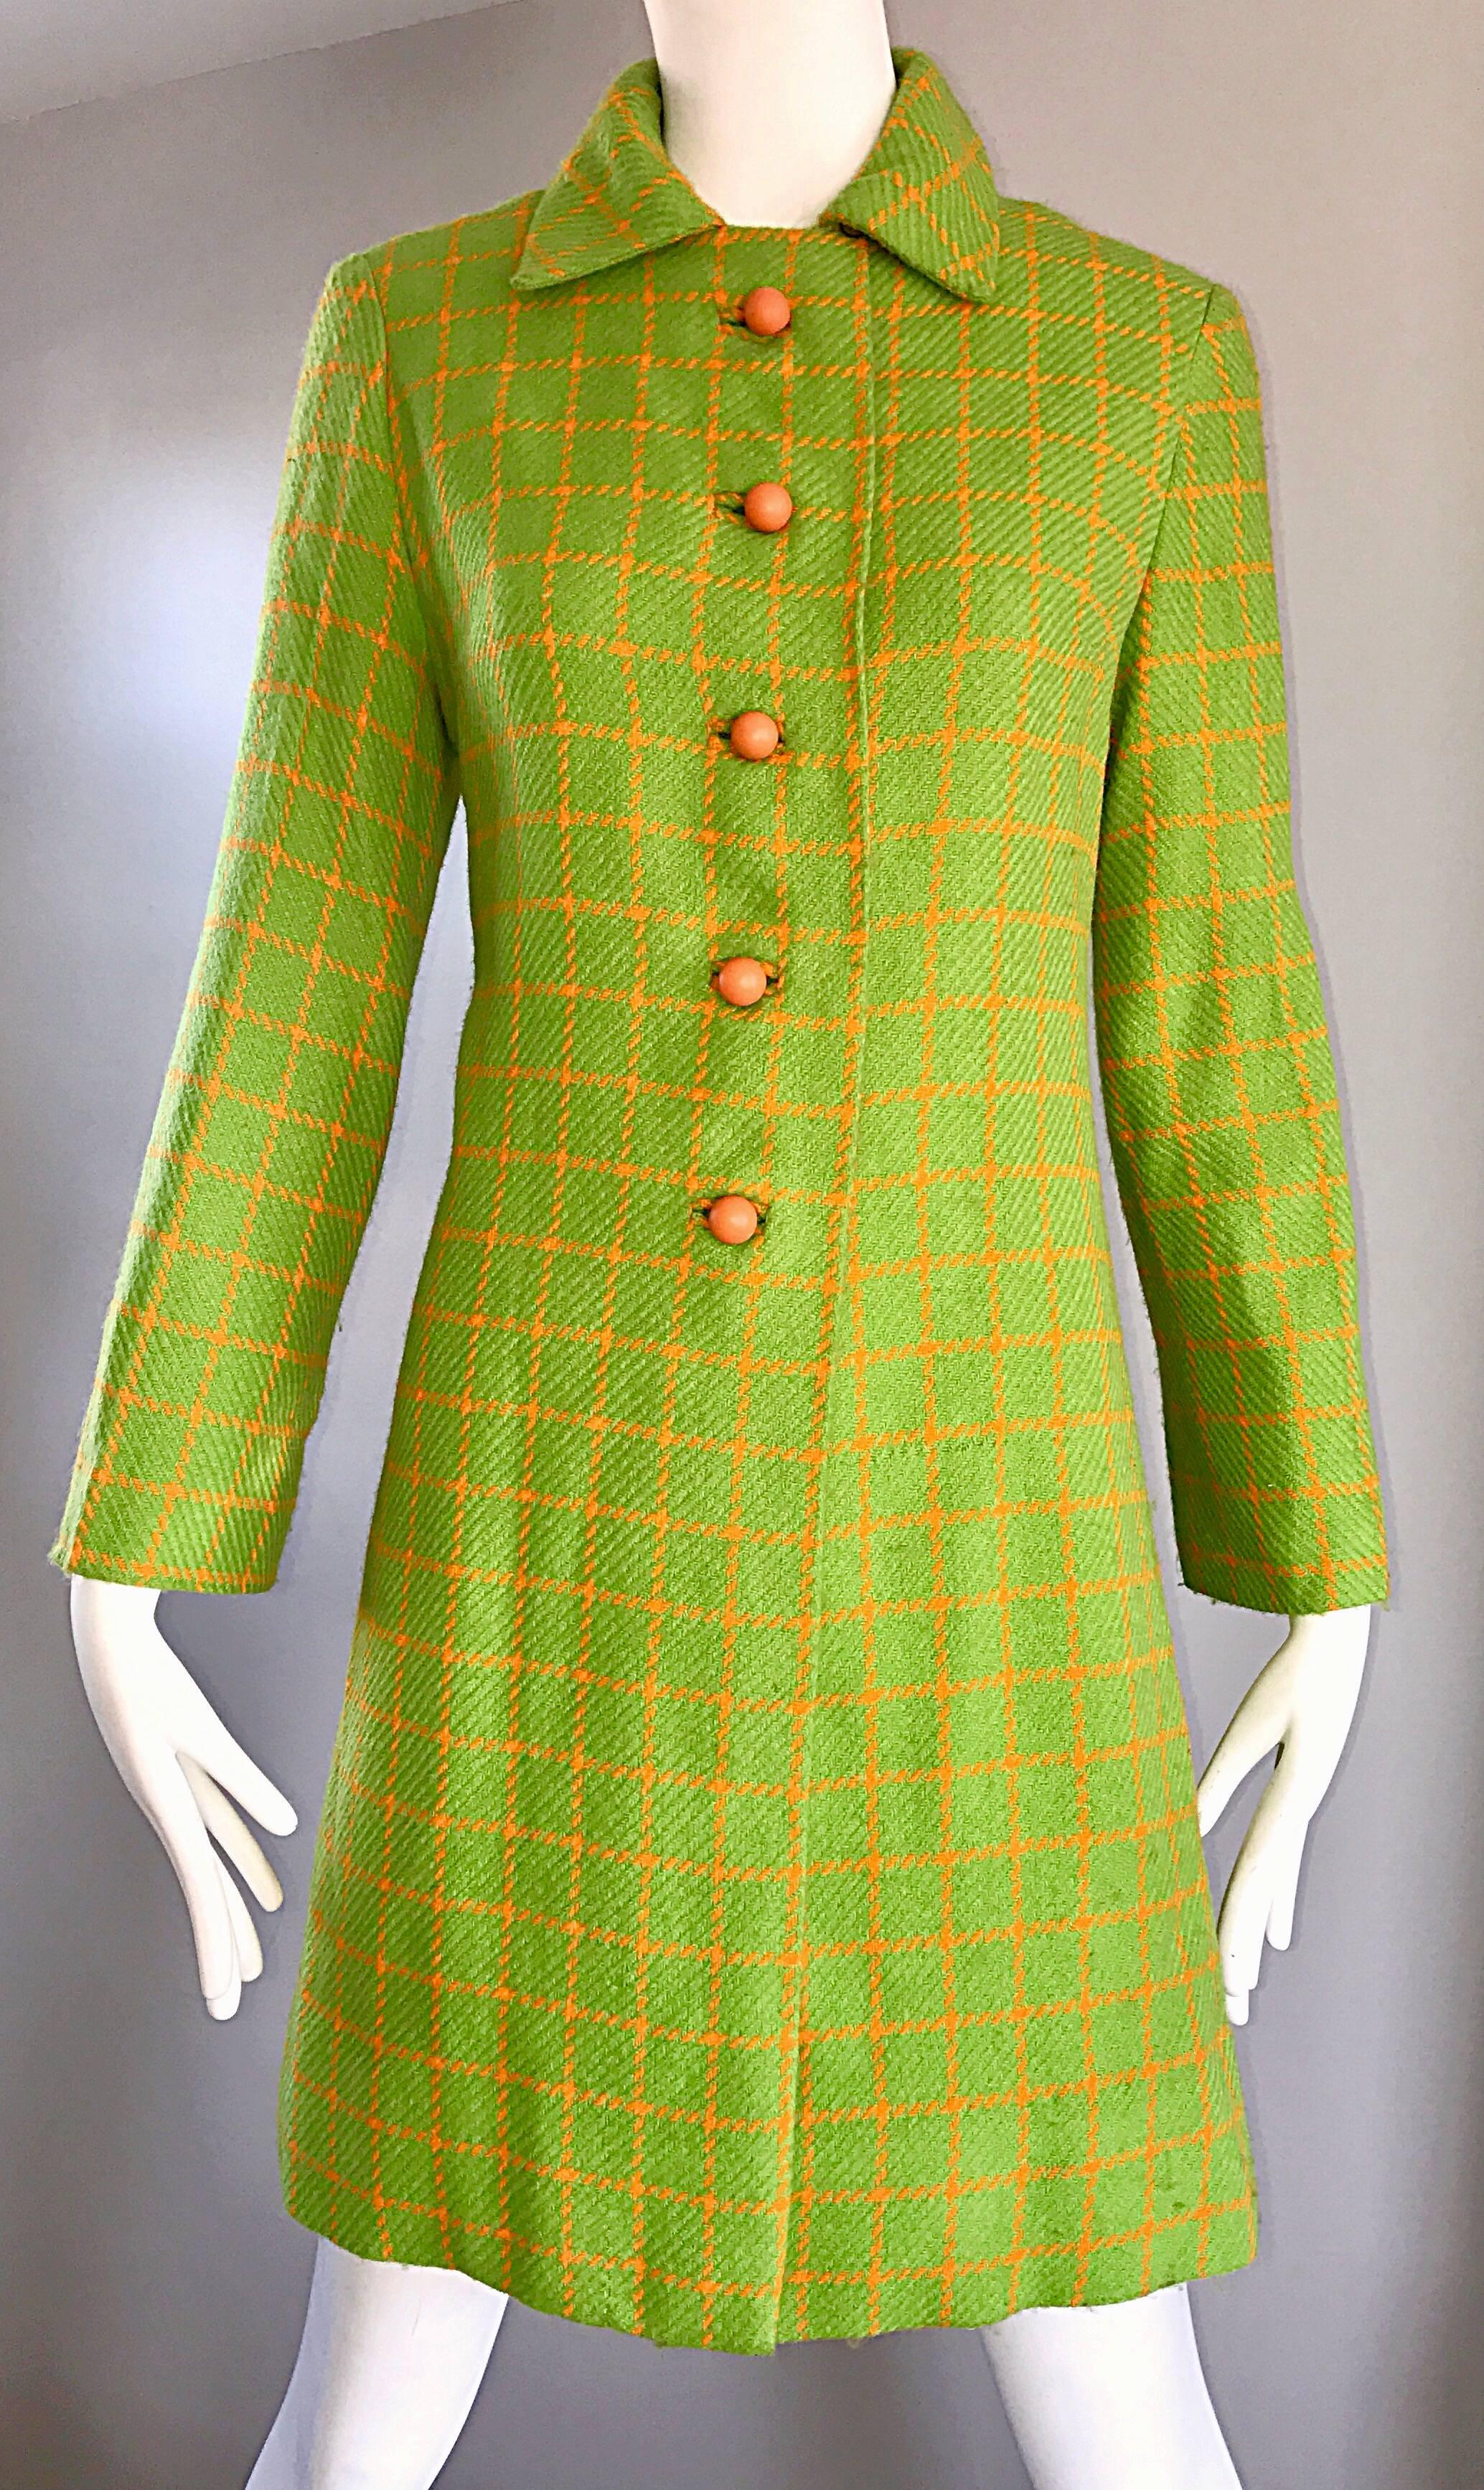 Chic vintage 60s neon lime green and bright orange checkered mod wool swing jacket! Flattering fit, with a tailored bodice and full body. Cute orange ball buttons up the front. Intricate pleating detail on the back. Fully lined in matching bright